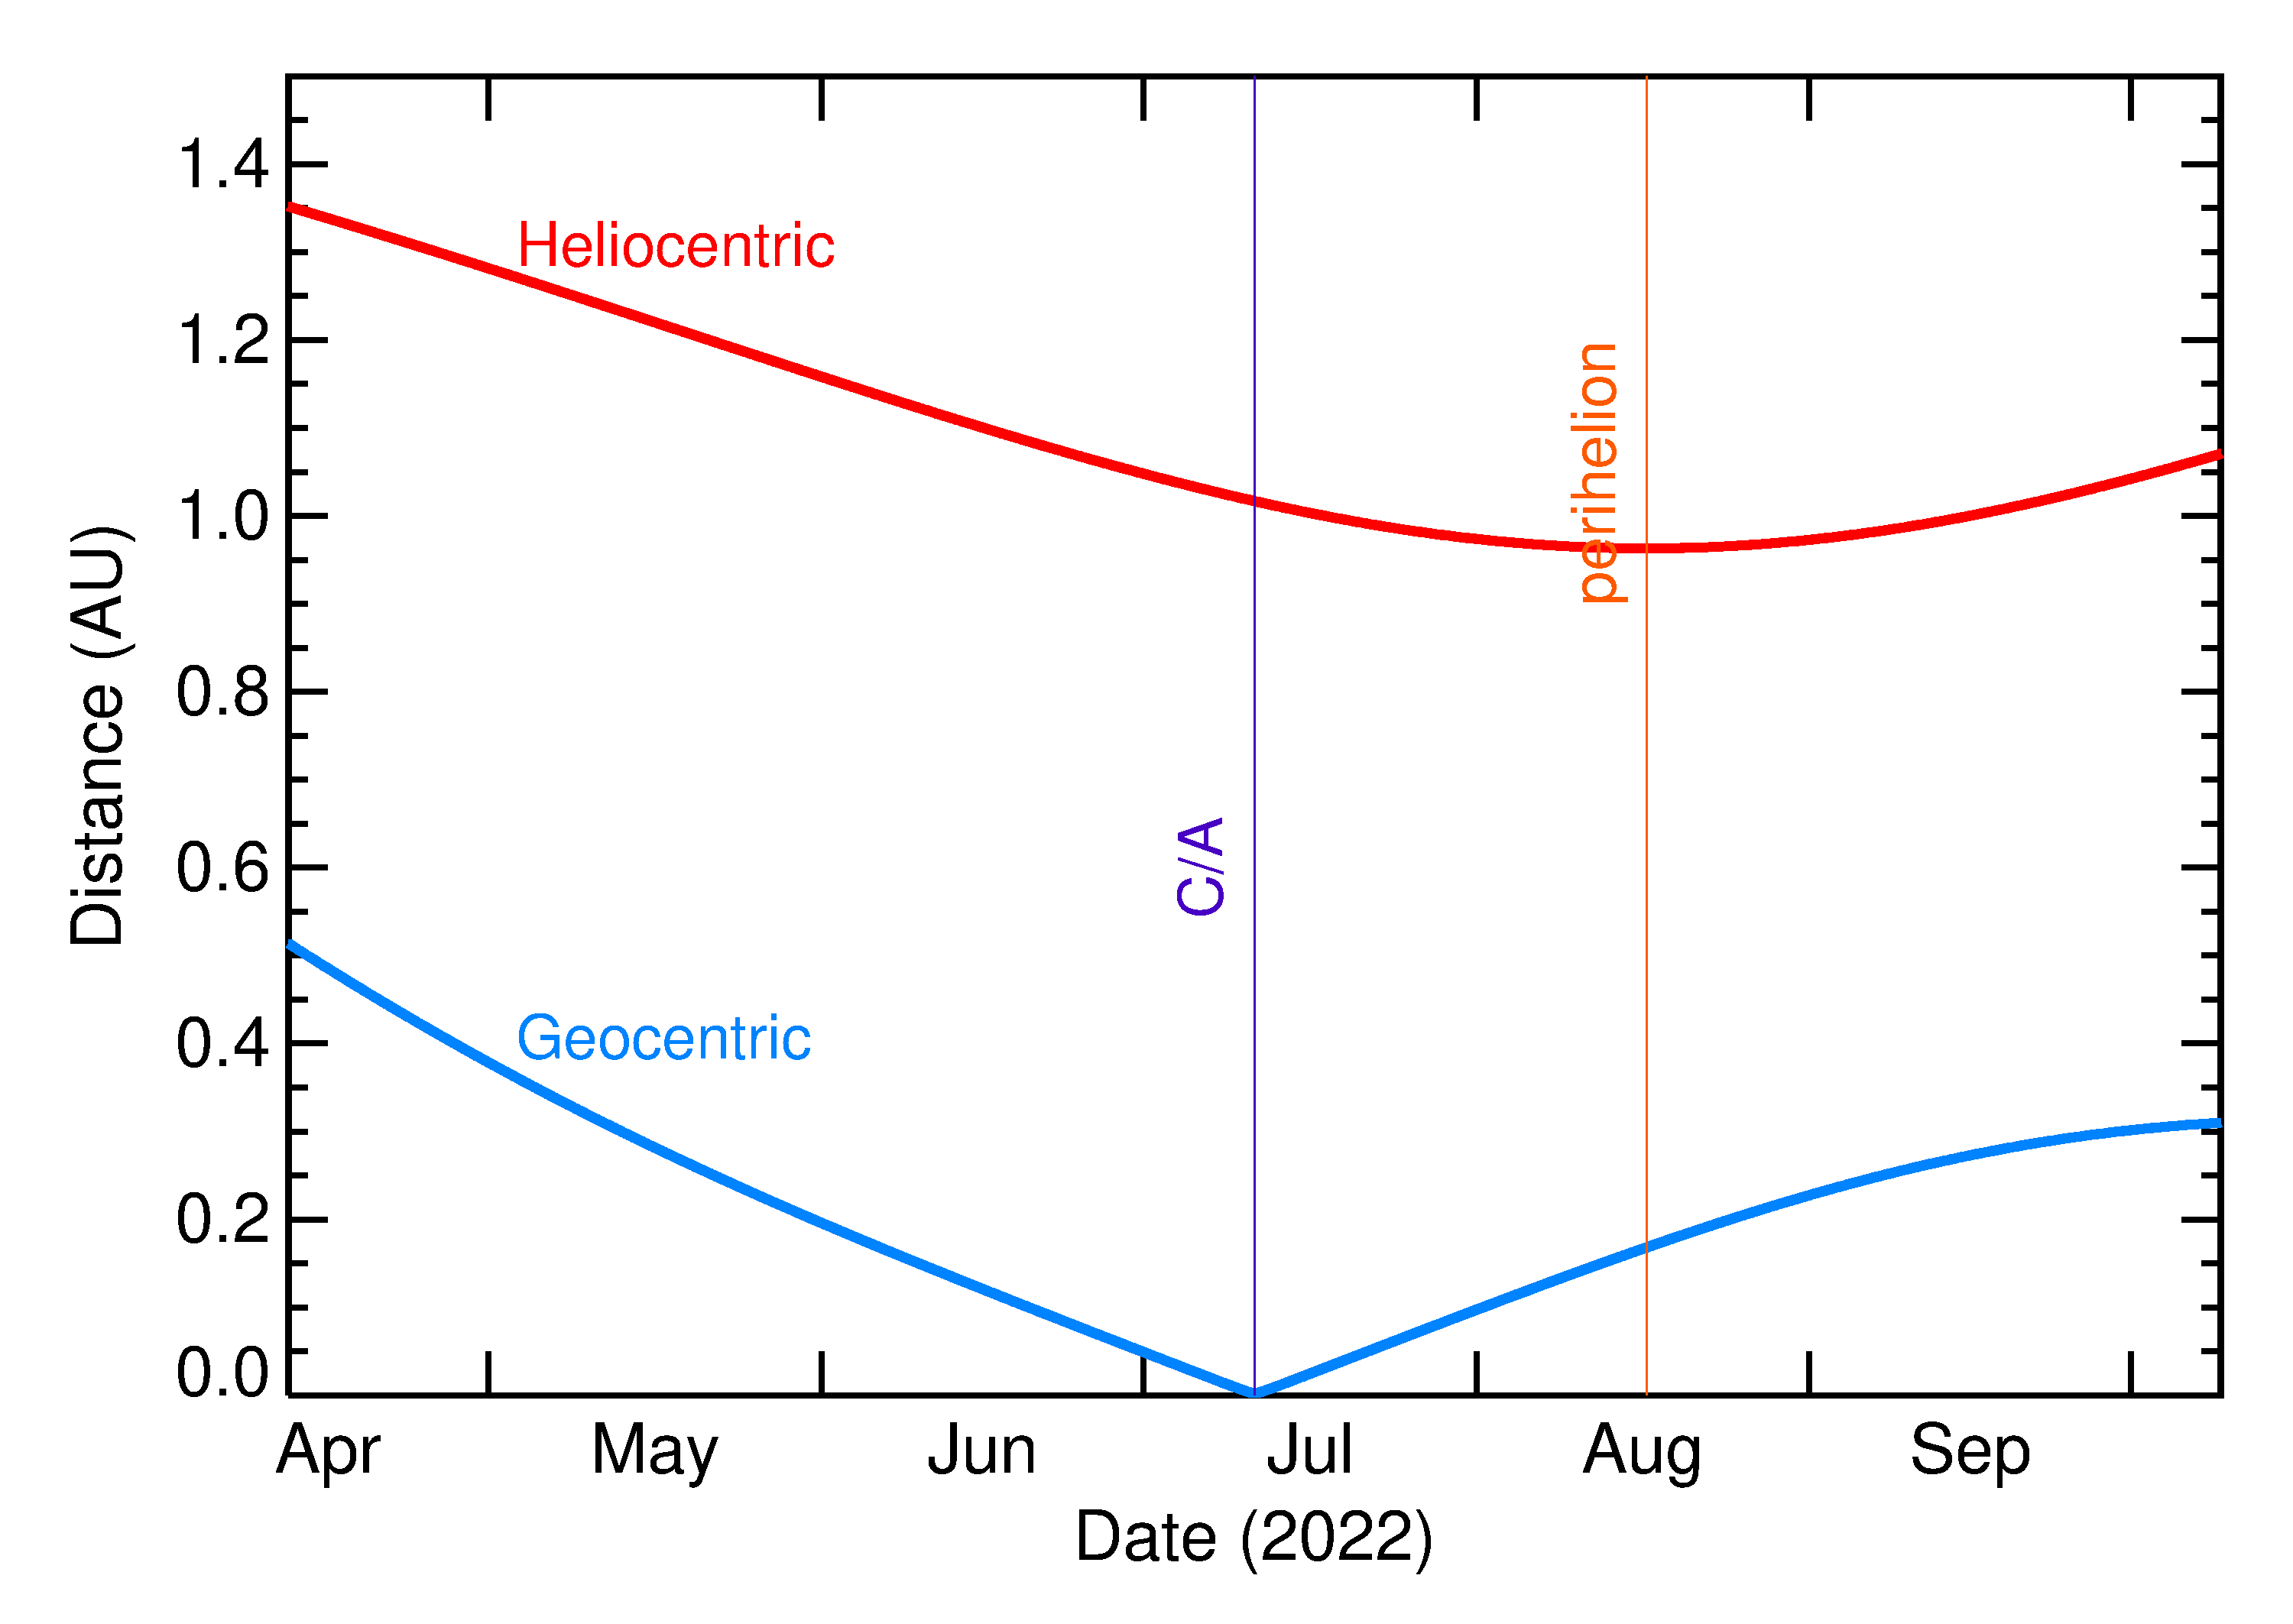 Heliocentric and Geocentric Distances of 2022 NR in the months around closest approach